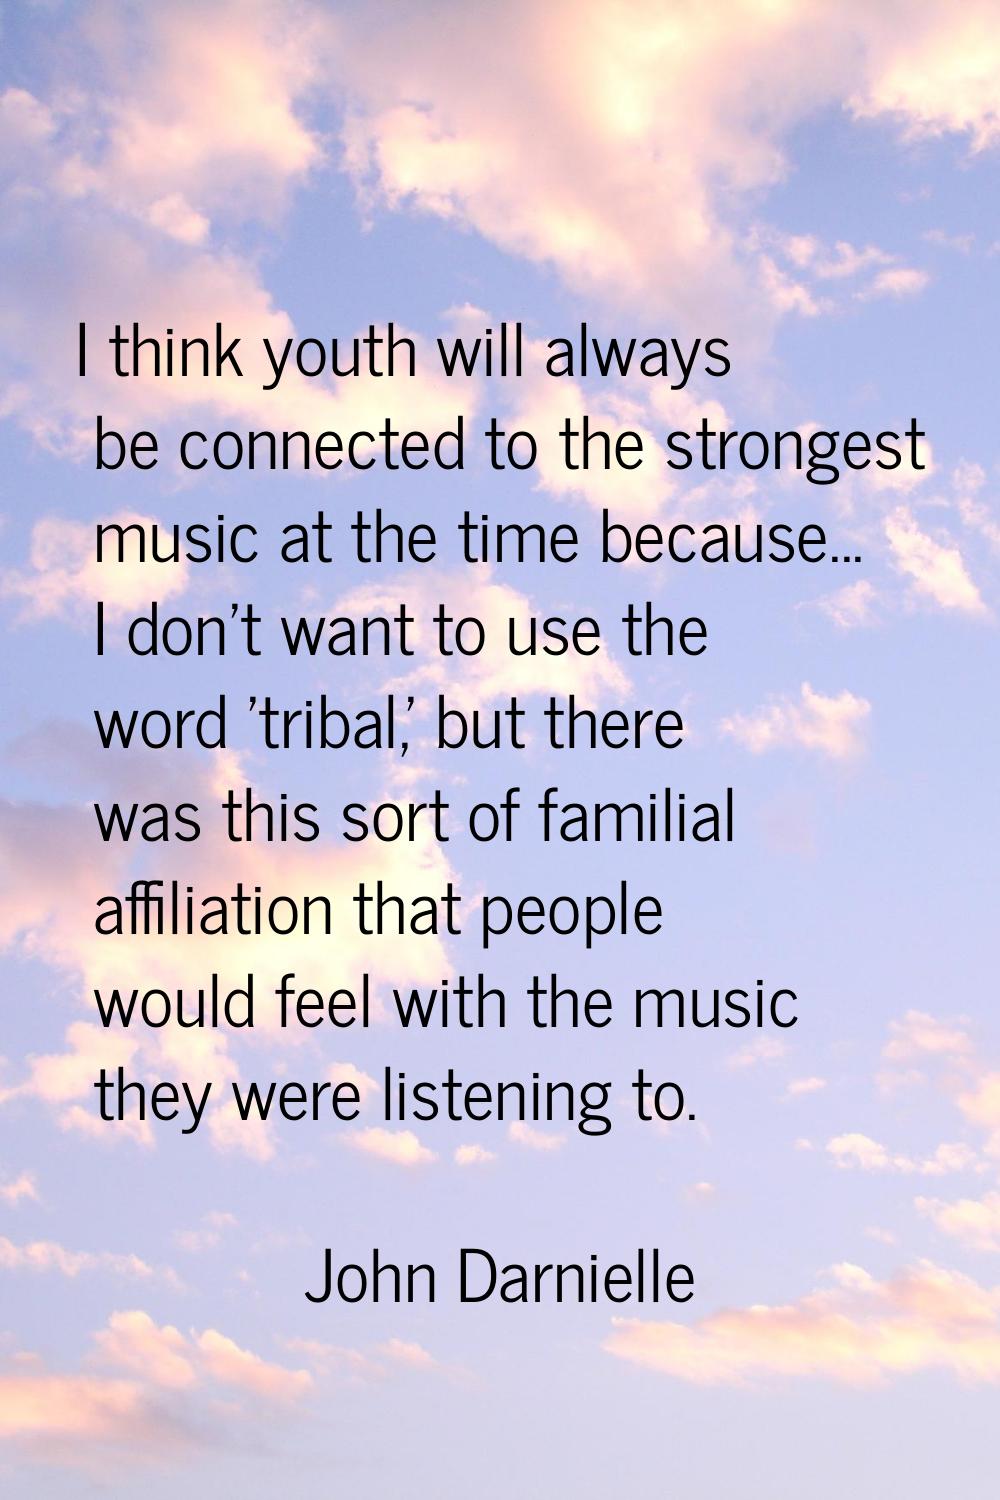 I think youth will always be connected to the strongest music at the time because... I don't want t